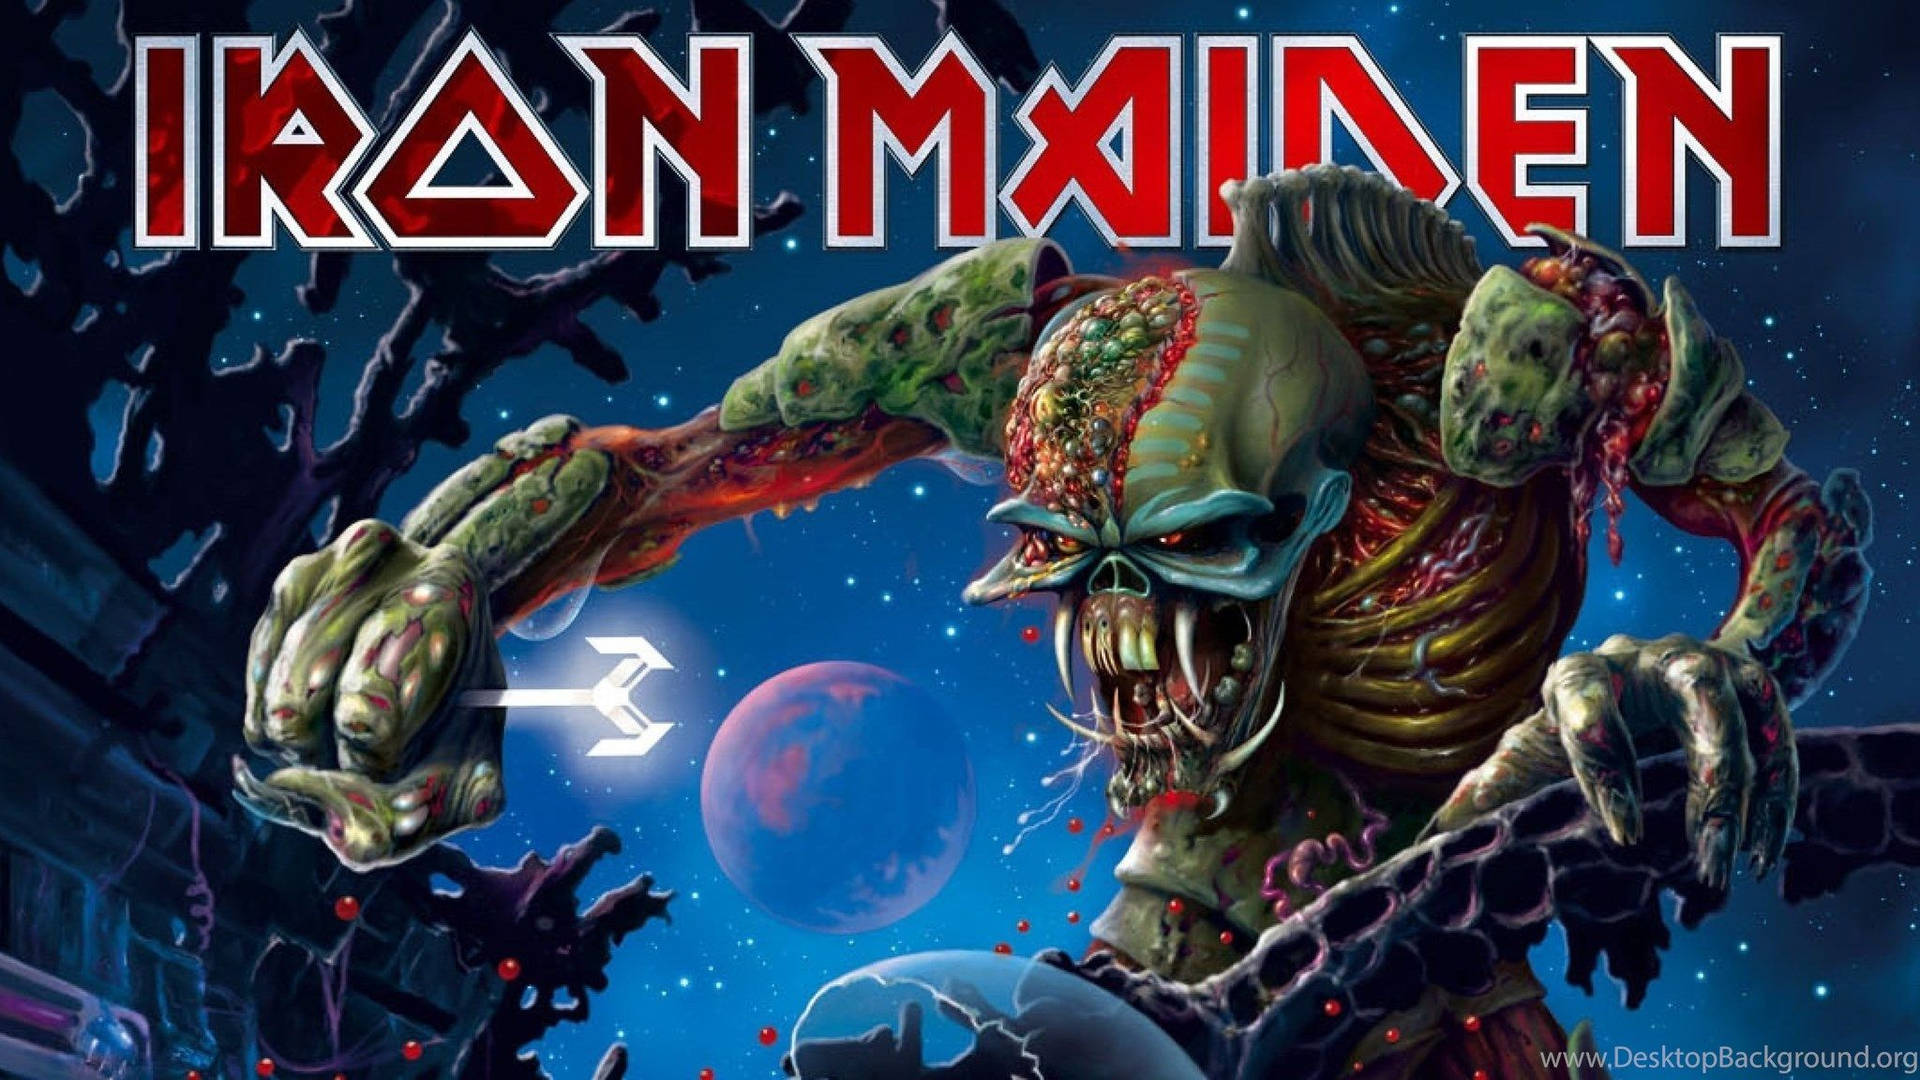 Iron Maiden The Final Frontier Background